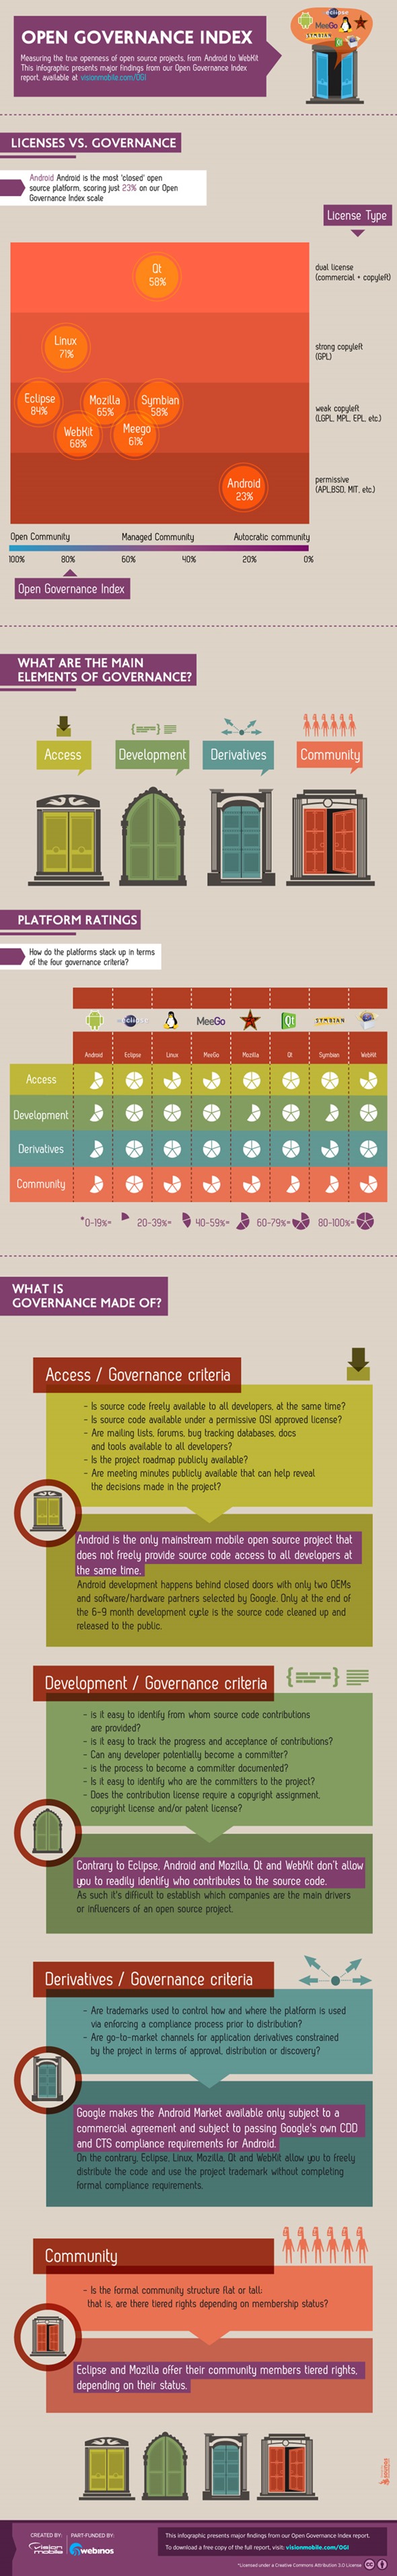 open-source-rankings-infographic